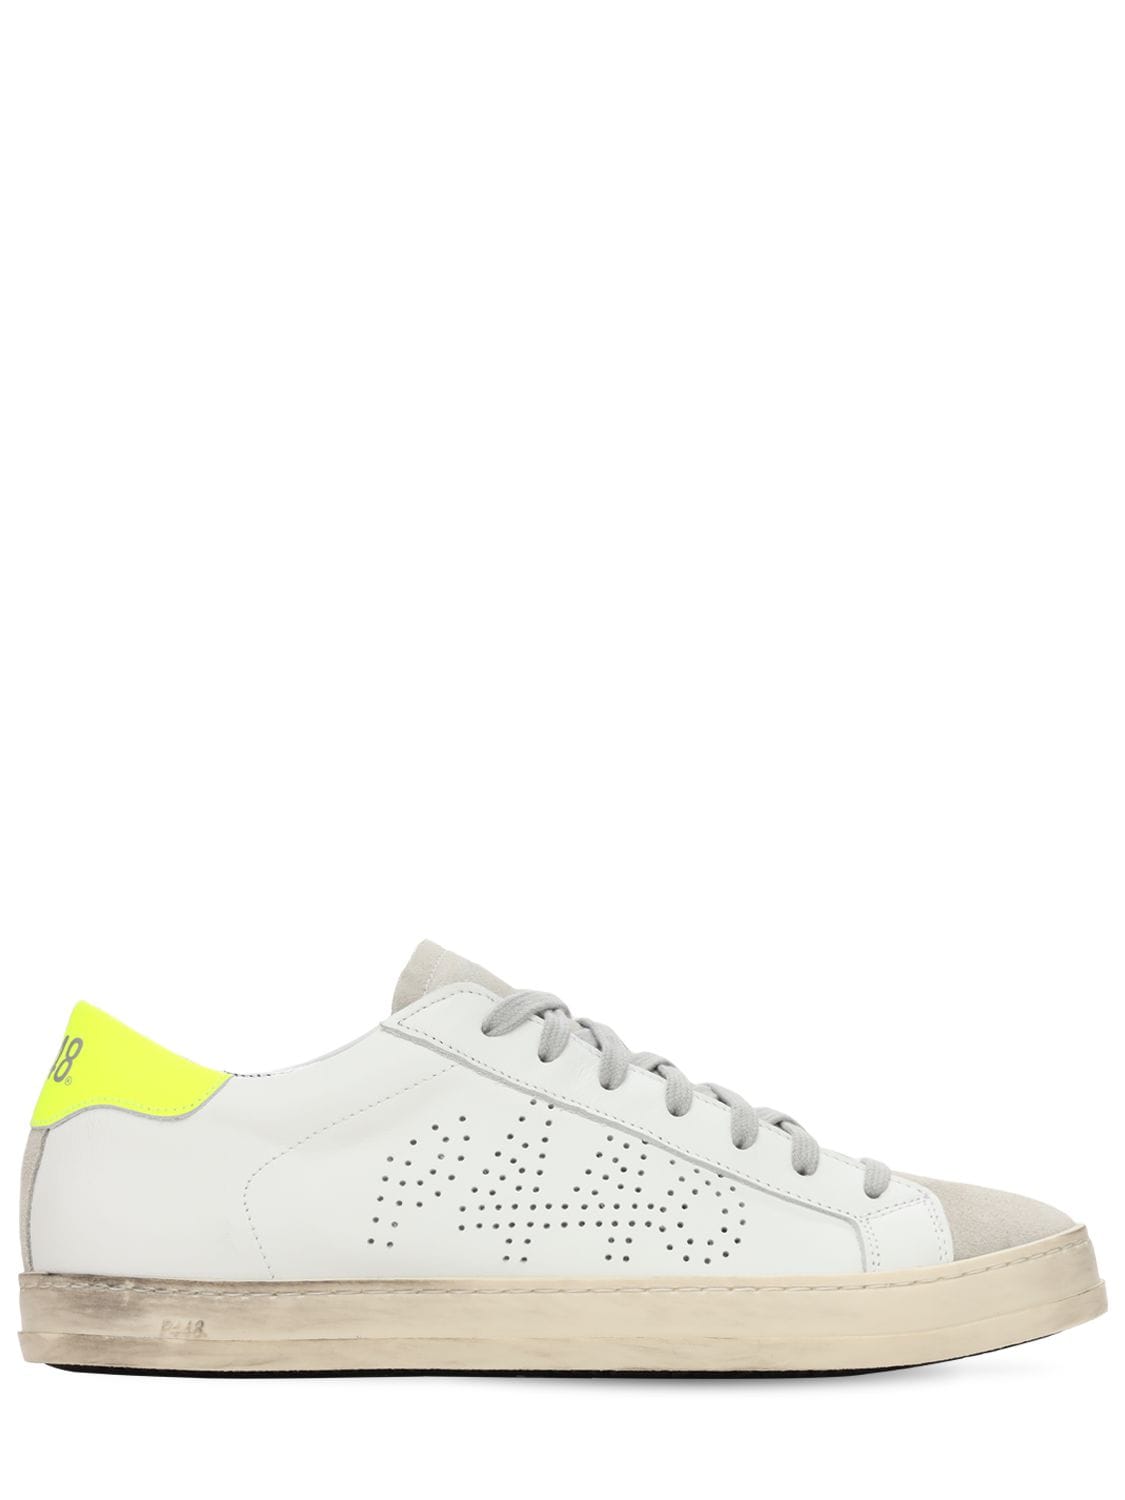 P448 John Leather & Suede Low-top Sneakers In White,yellow